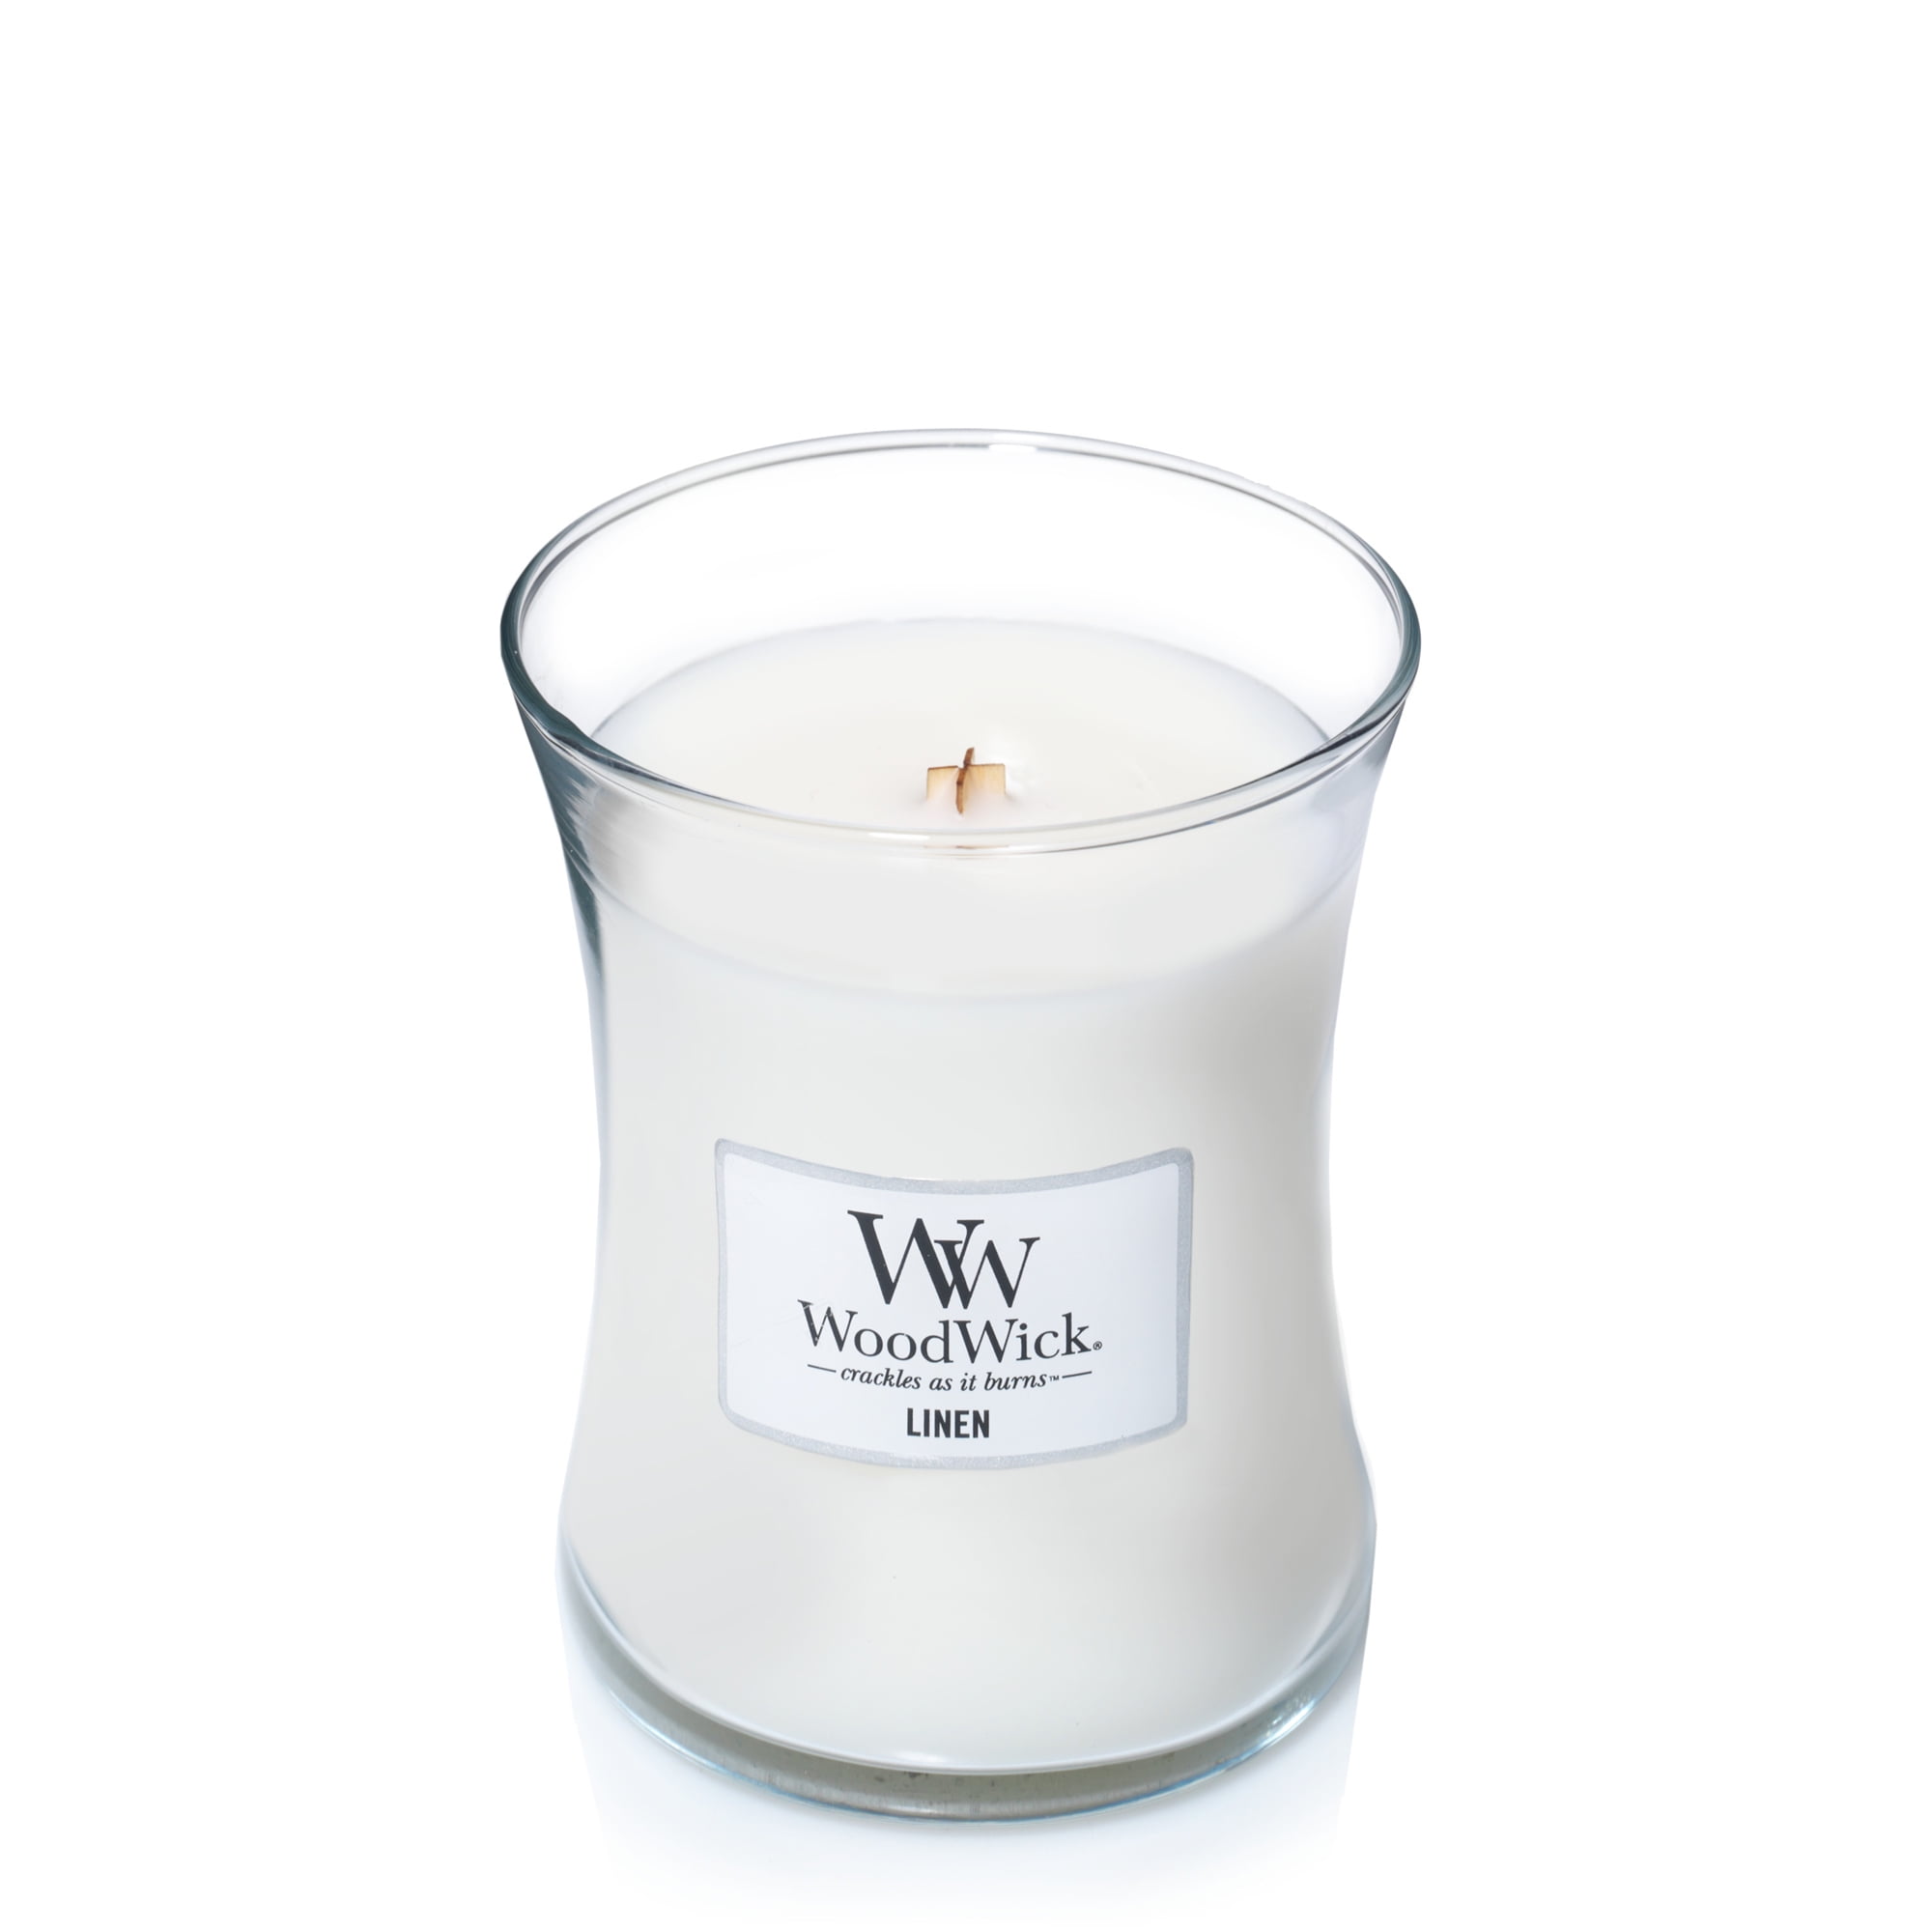 Linen Burn Time: Up to 60 Hours Linen Woodwick Medium Hourglass Scented Candle with Crackling Wick 